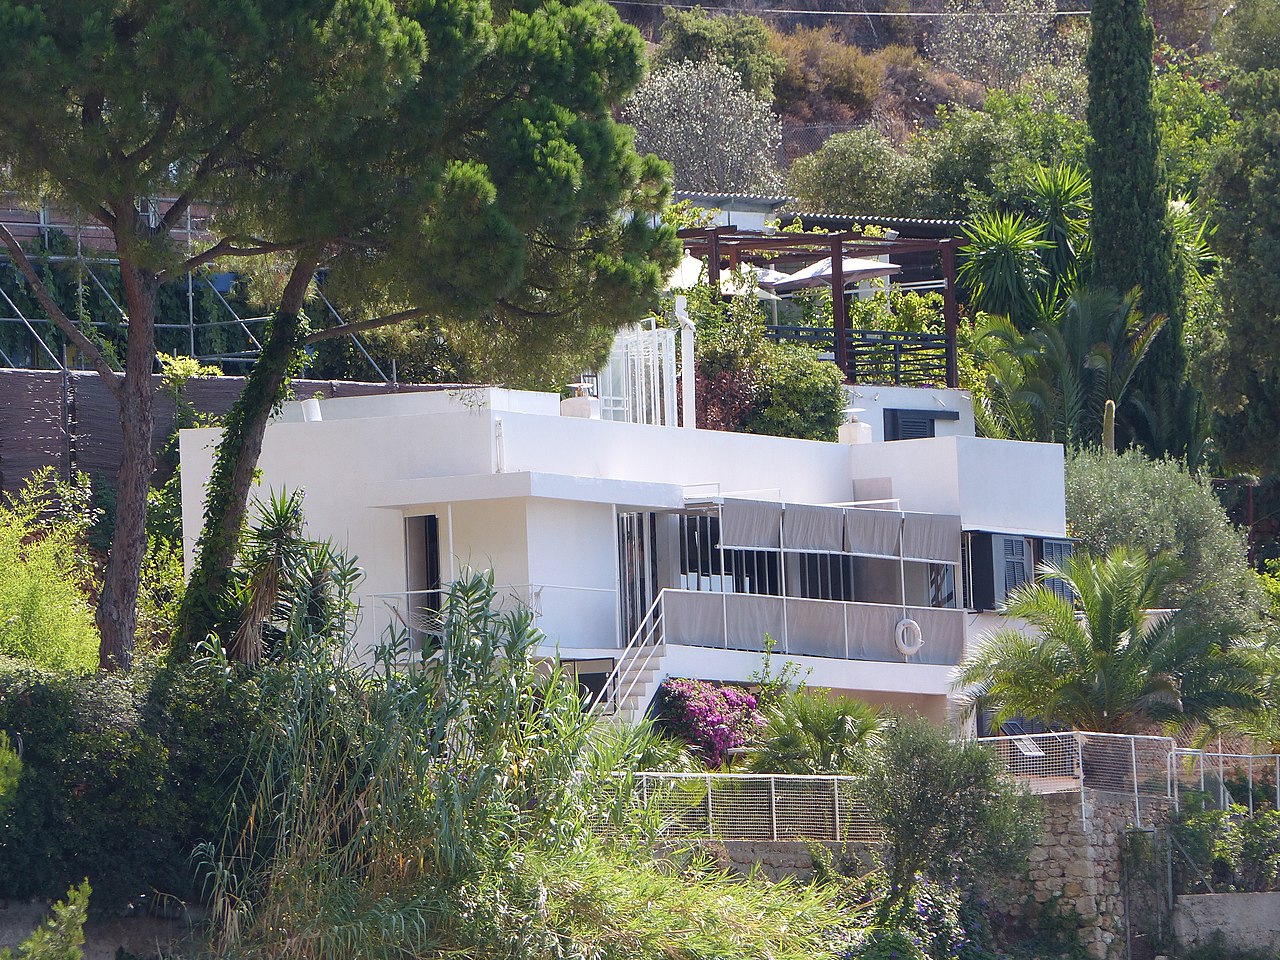 Eileen Gray’s E-1027 Reopens to the Public